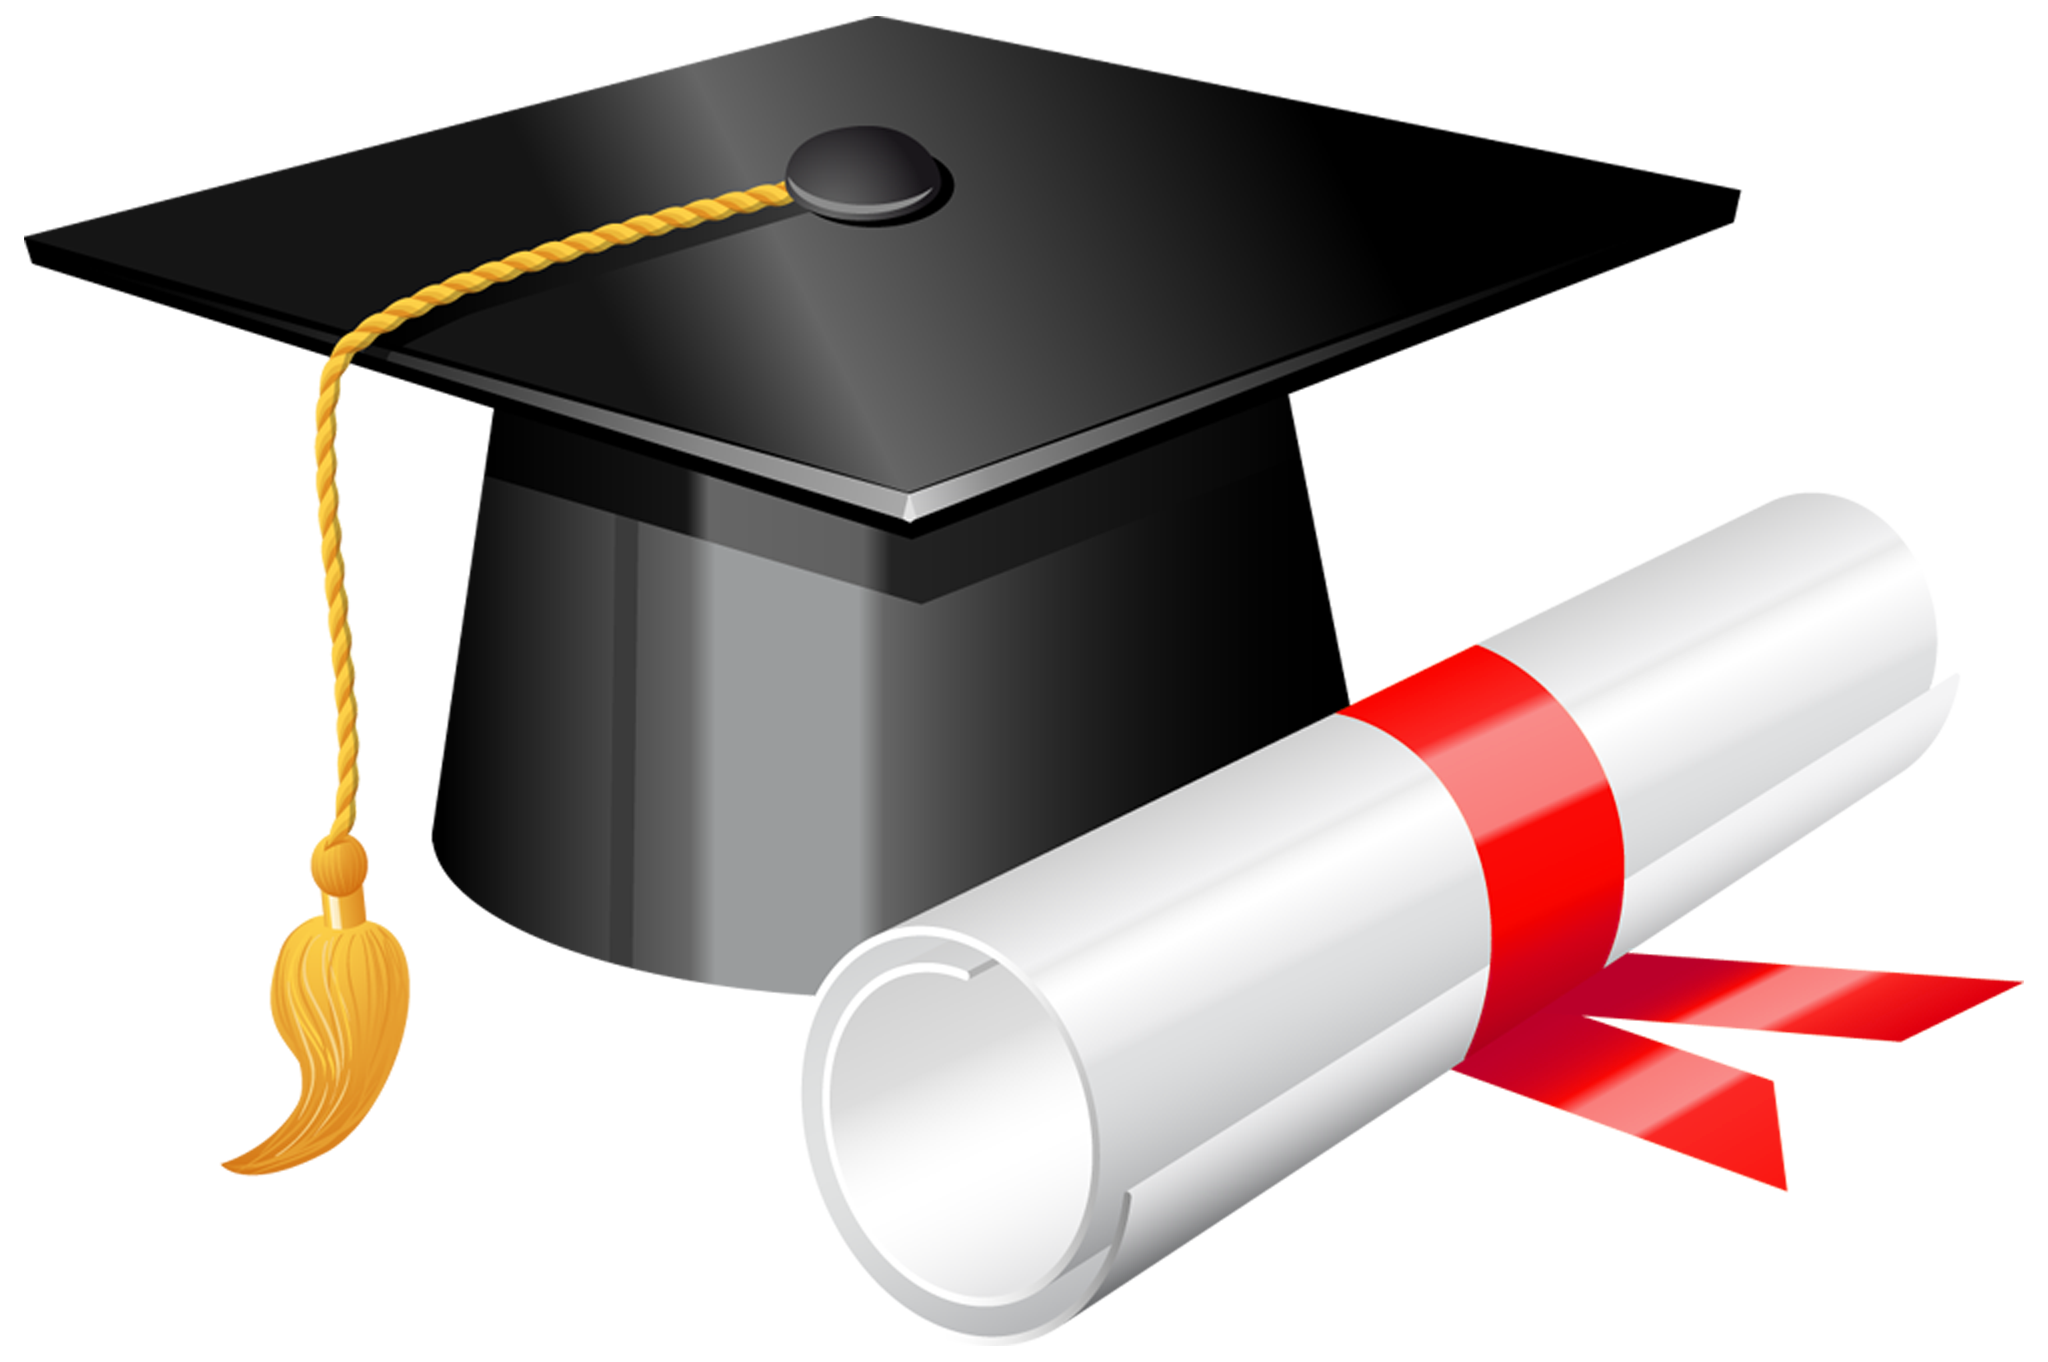 Graduation Cap Clipart for printable to